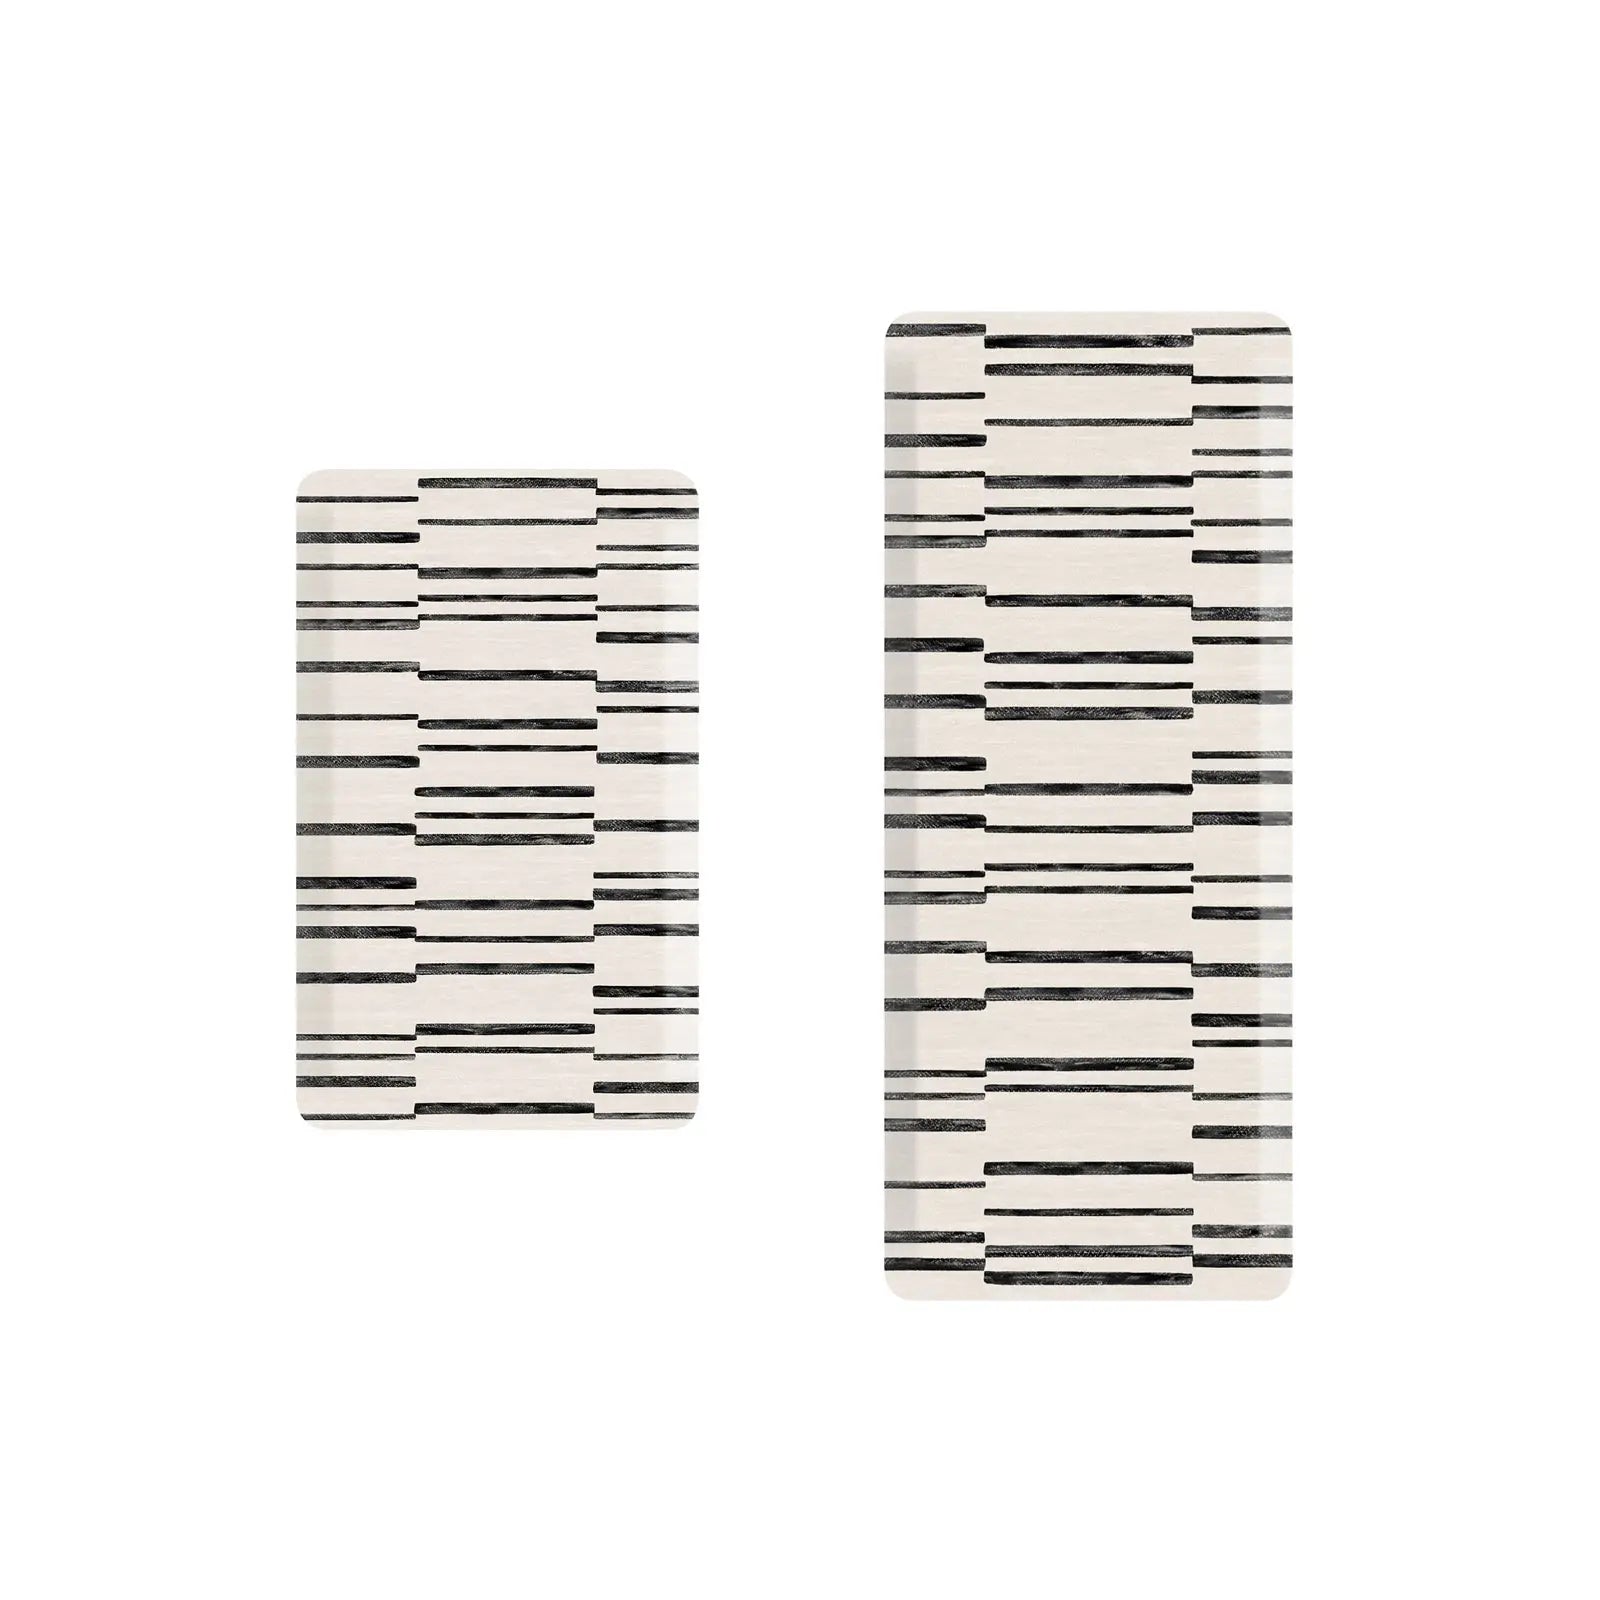 Black and White Minimal Inverted Stripe Print Standing Mat shown in size 22x36 and 22x54